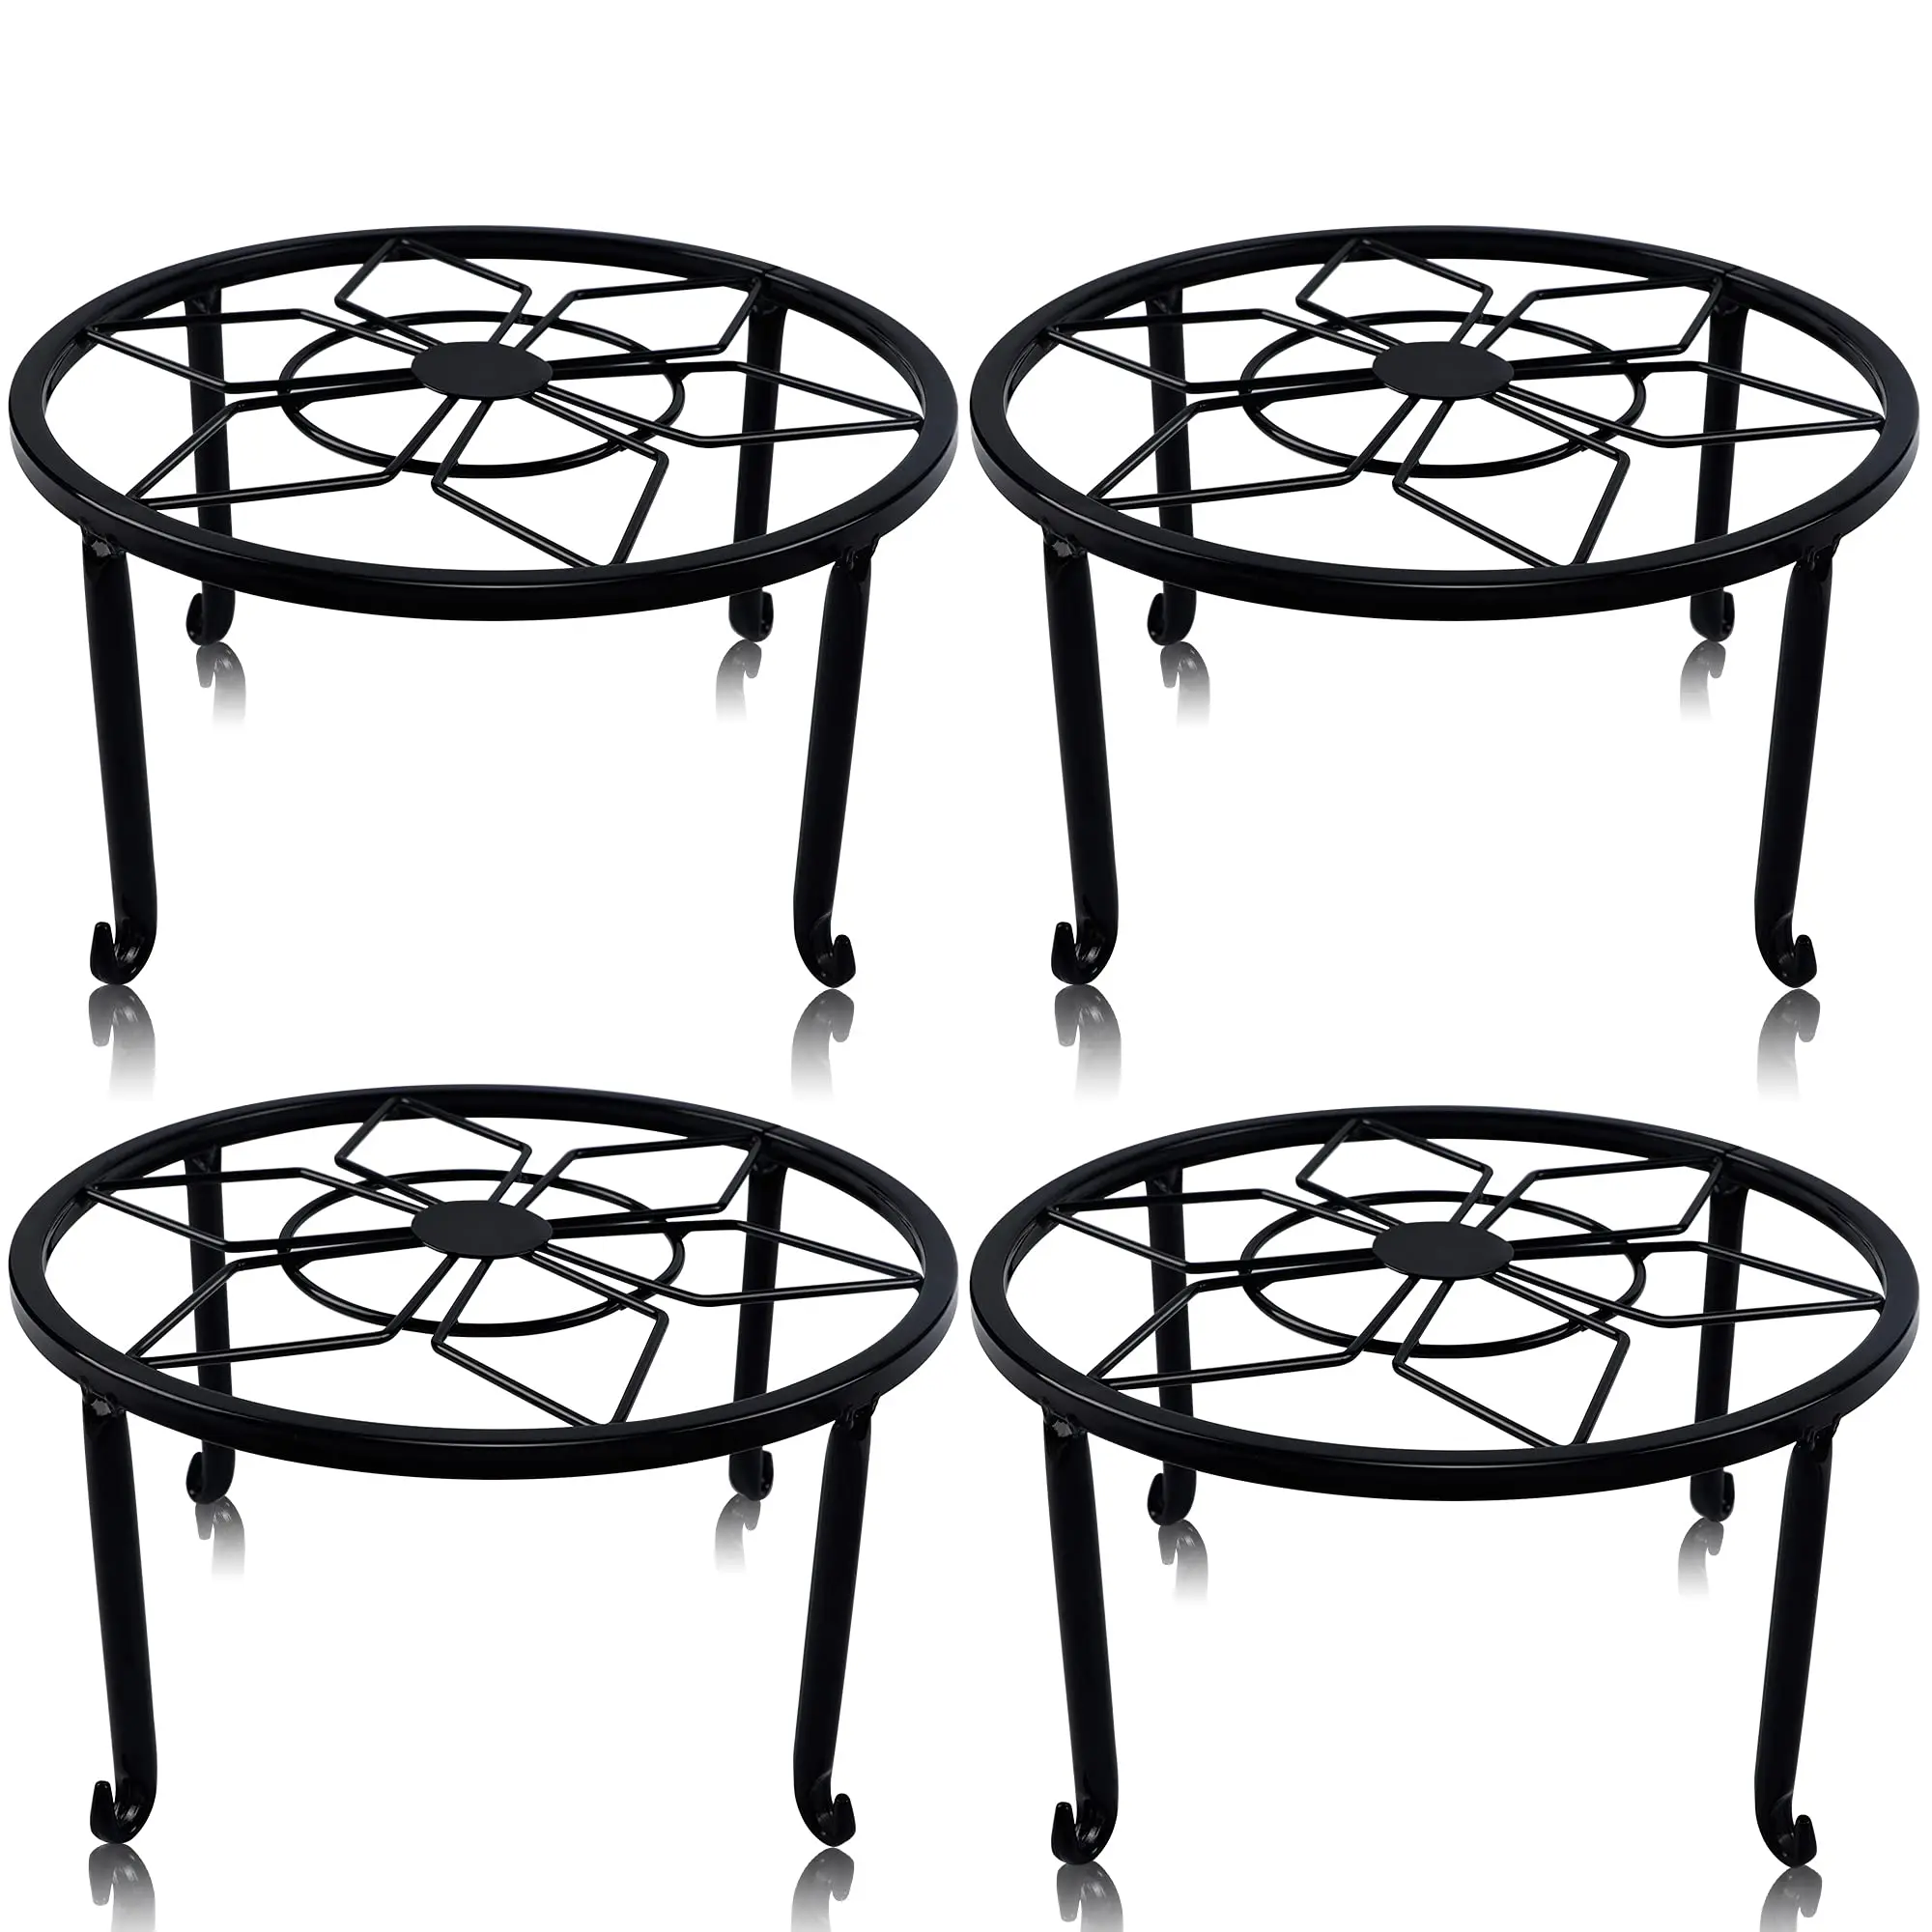 Home & Garden Decor Metal Planter Container Round Supports Display Rack Metal Plant Stands for Flower Pot